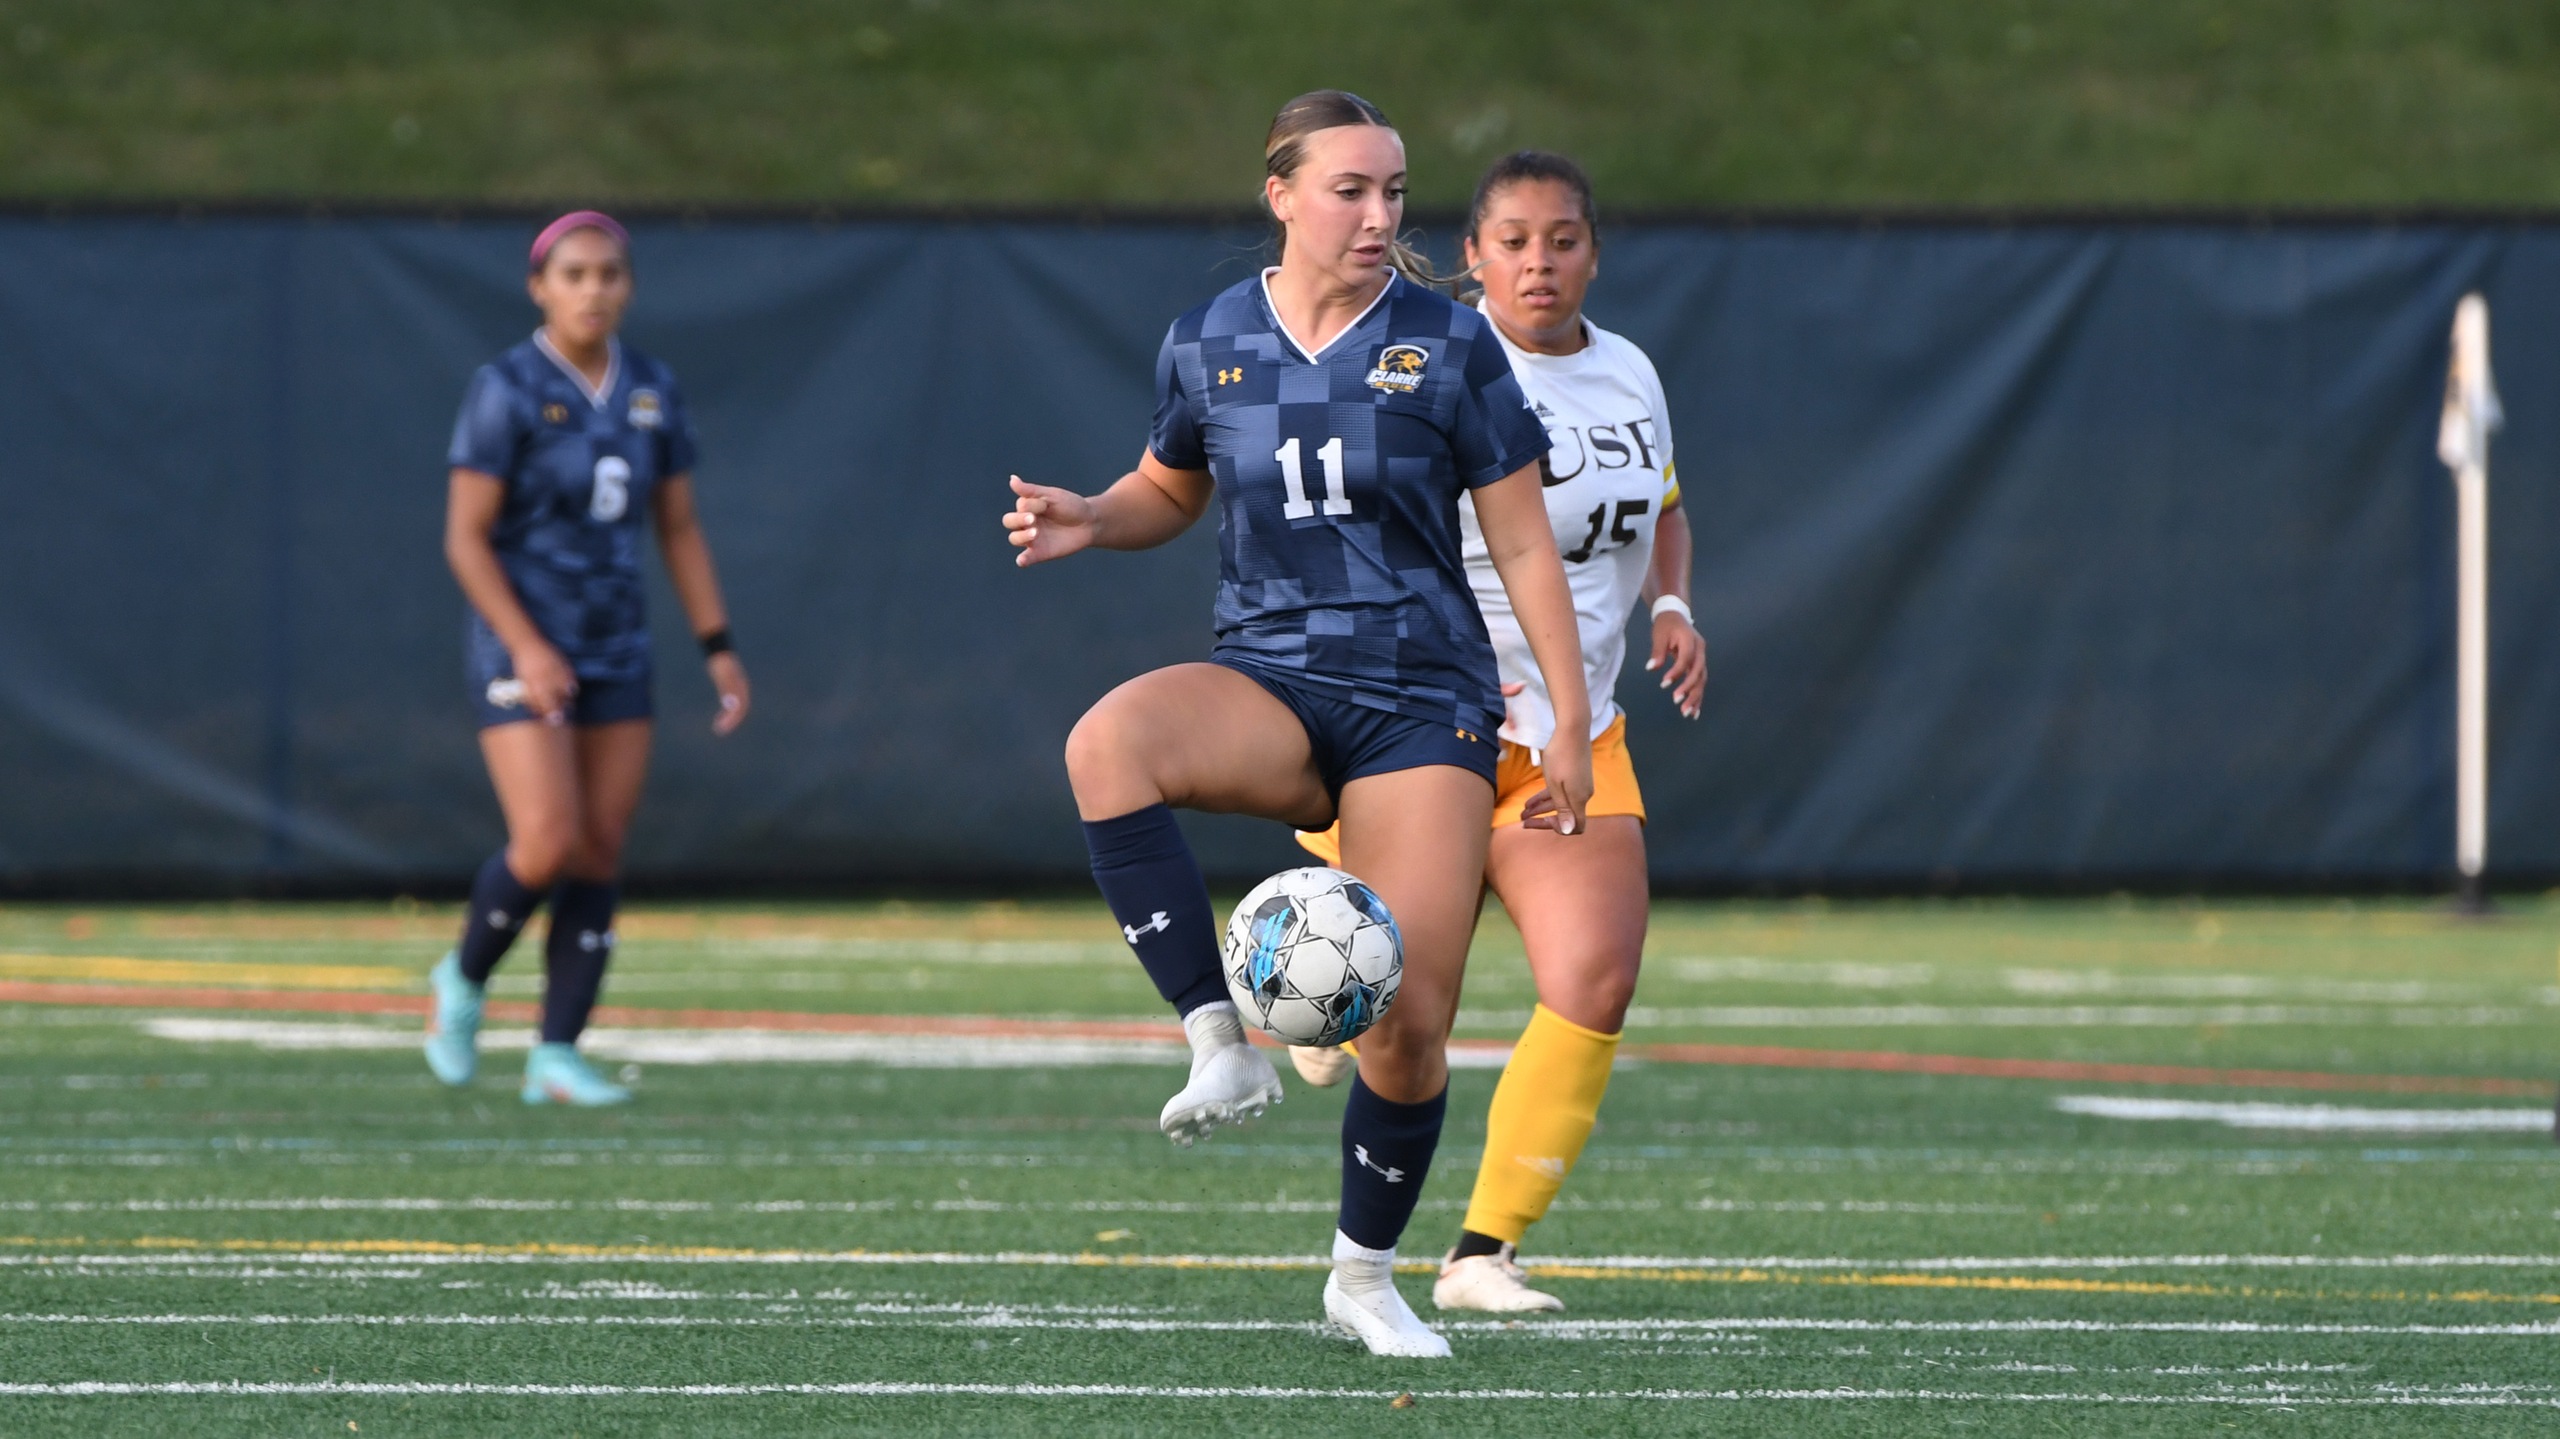 Pritchard's two second-half goals lift Pride over Baker 4-0